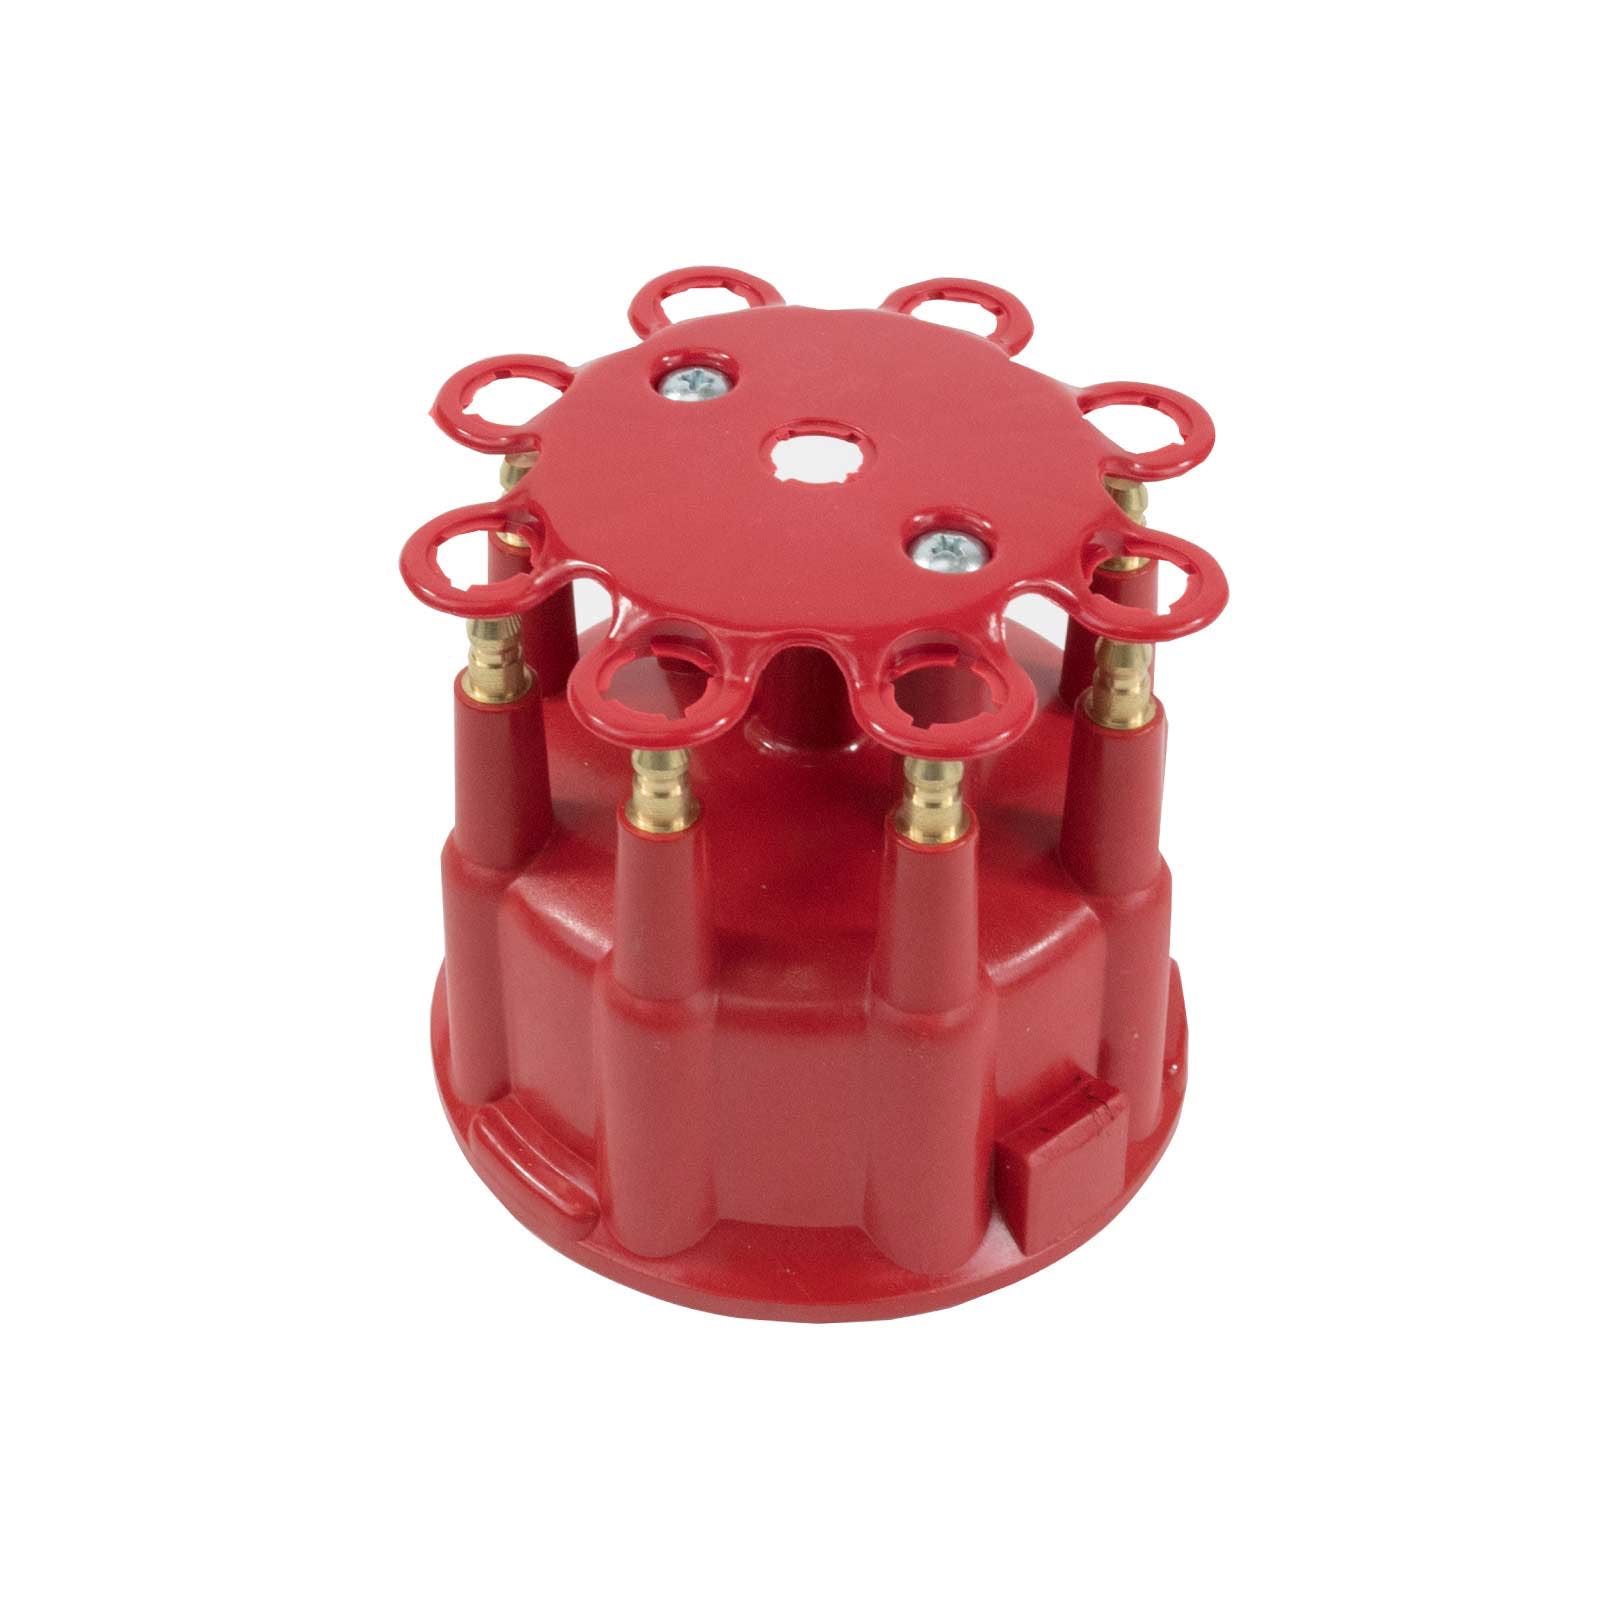 Top Street Performance JM6971R Pro Billet Ready To Run Distributor Cap and Rotor Kit Red